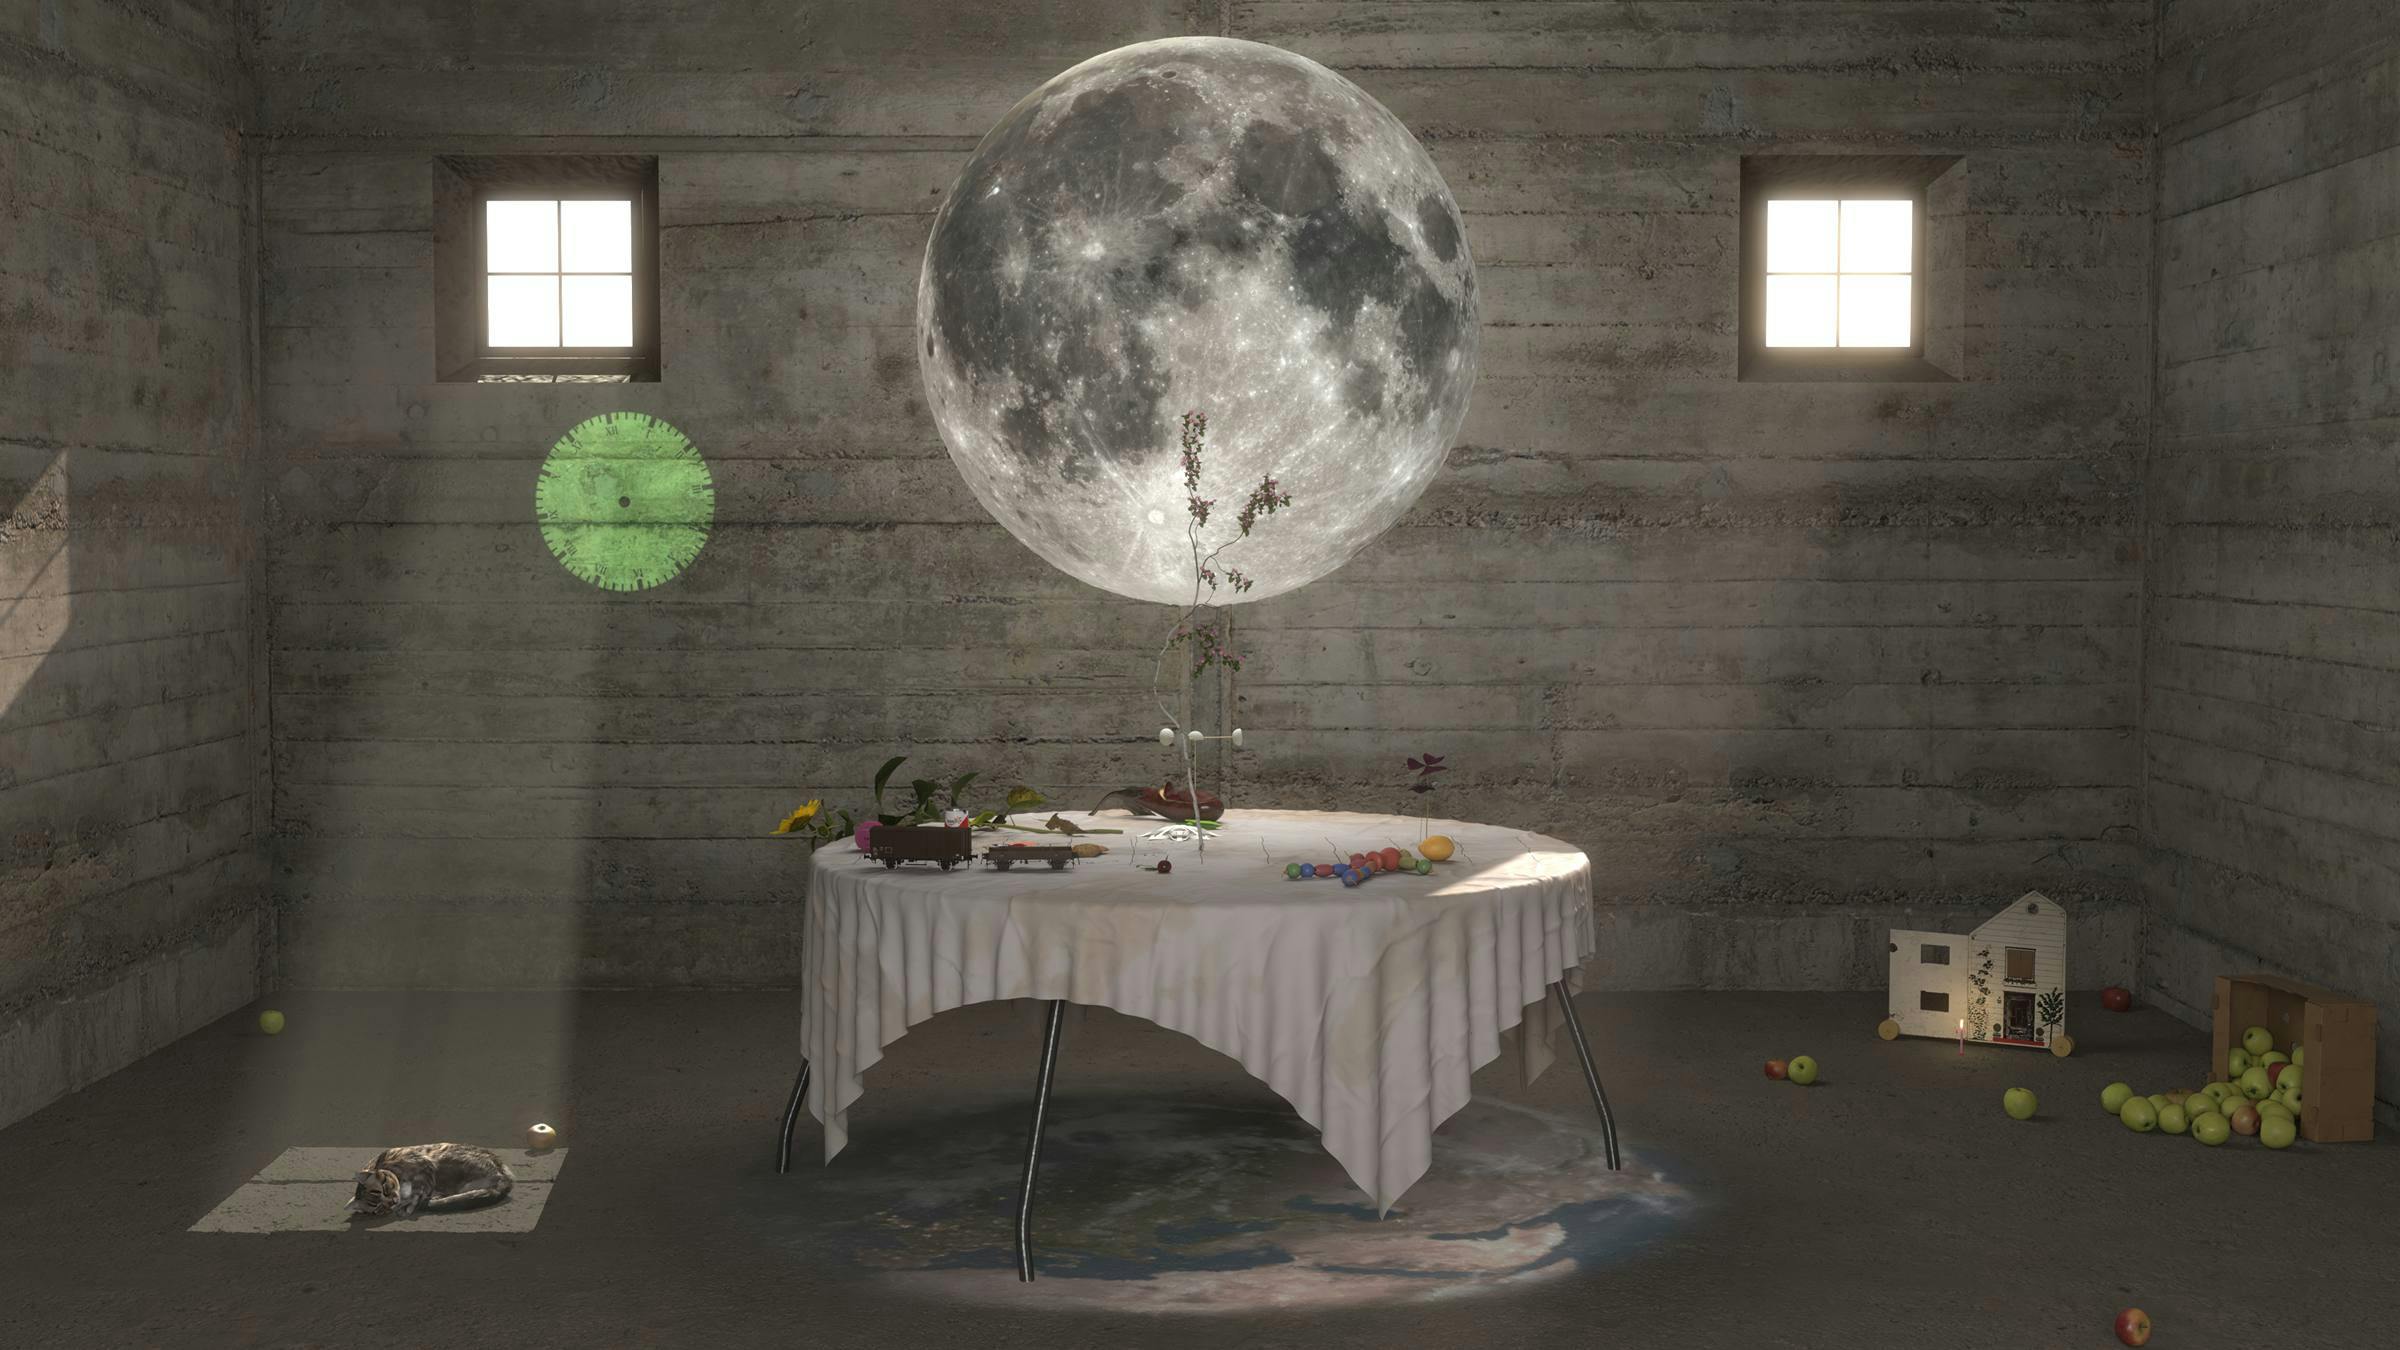 Full moon hovers above a table with a white table cloth on top of it. Light shines through two small square windows on either side.